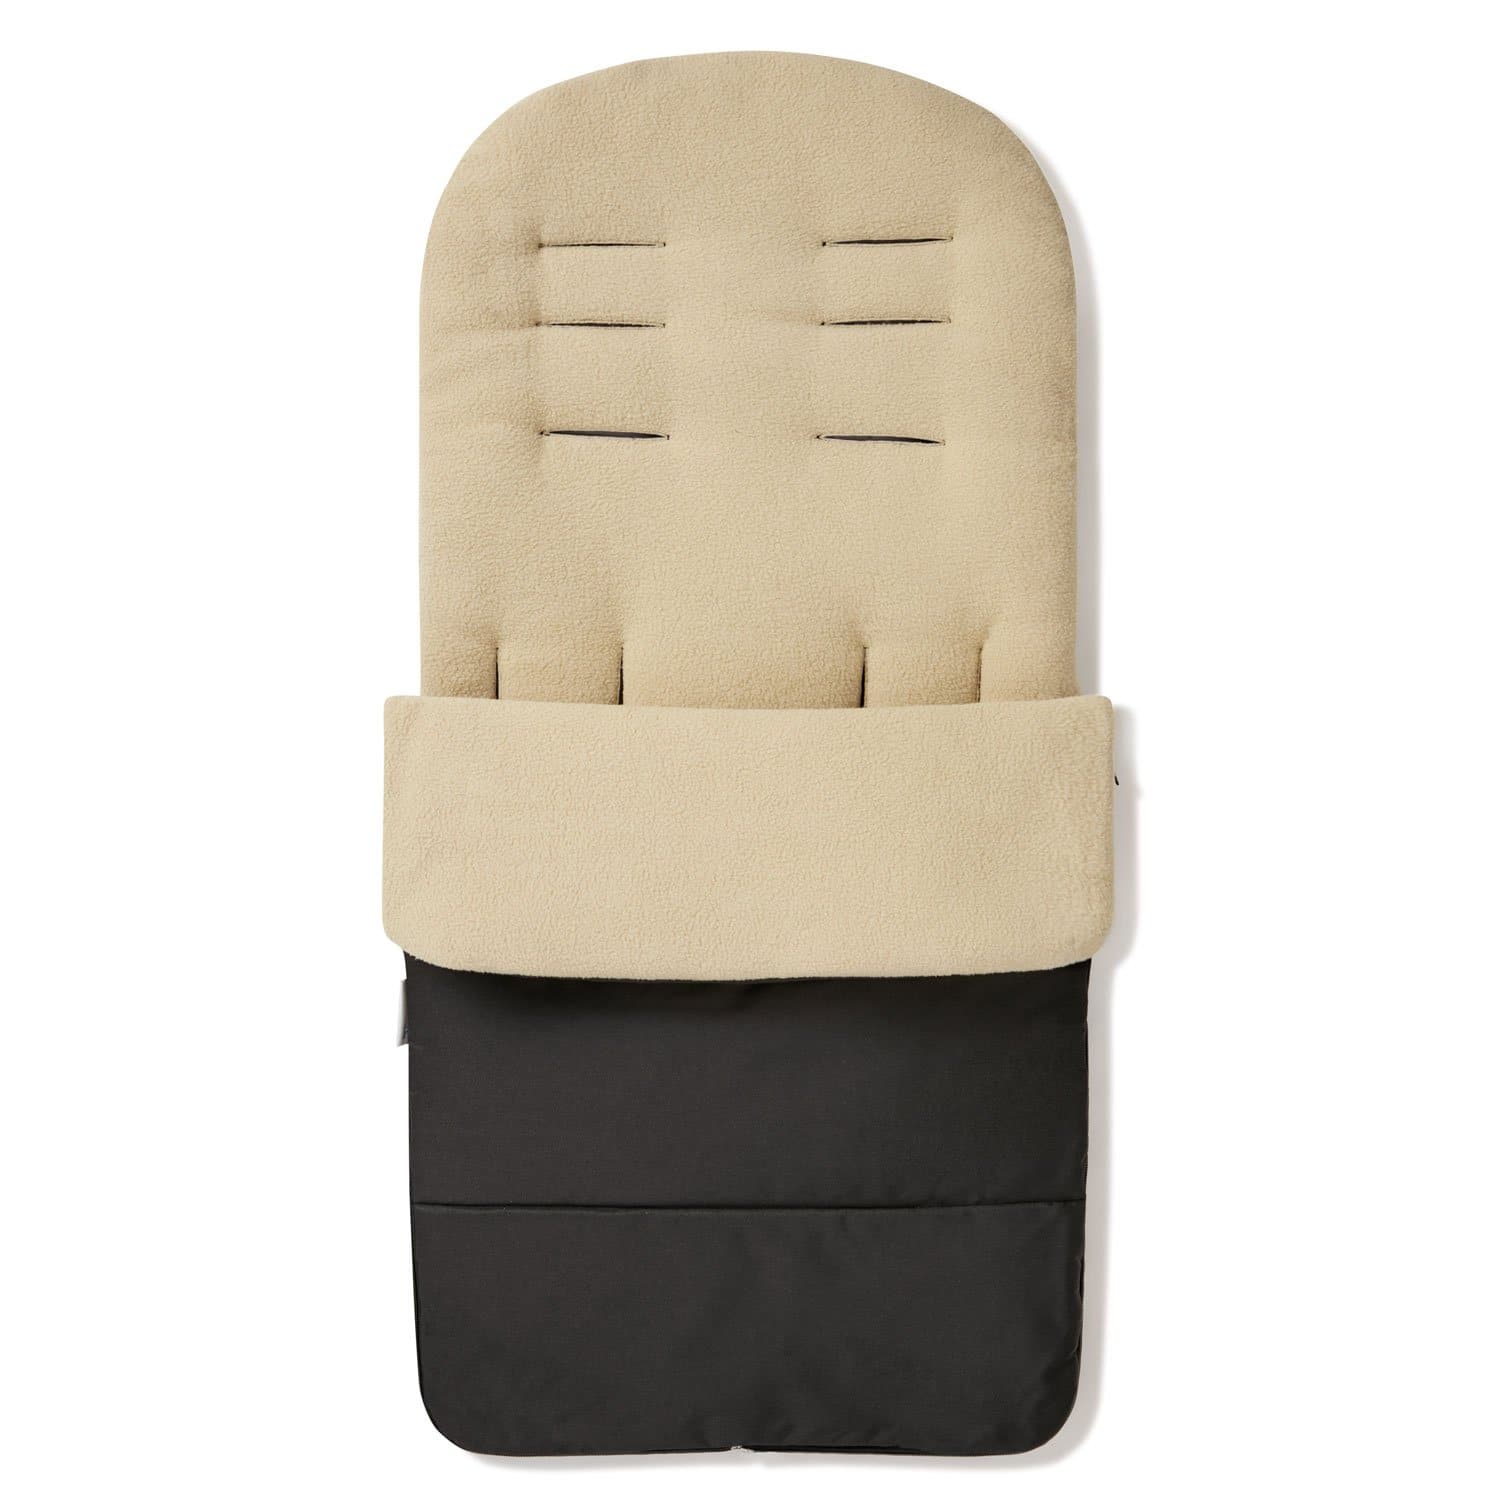 Premium Footmuff / Cosy Toes Compatible with BabySun - Desert Sand / Fits All Models | For Your Little One